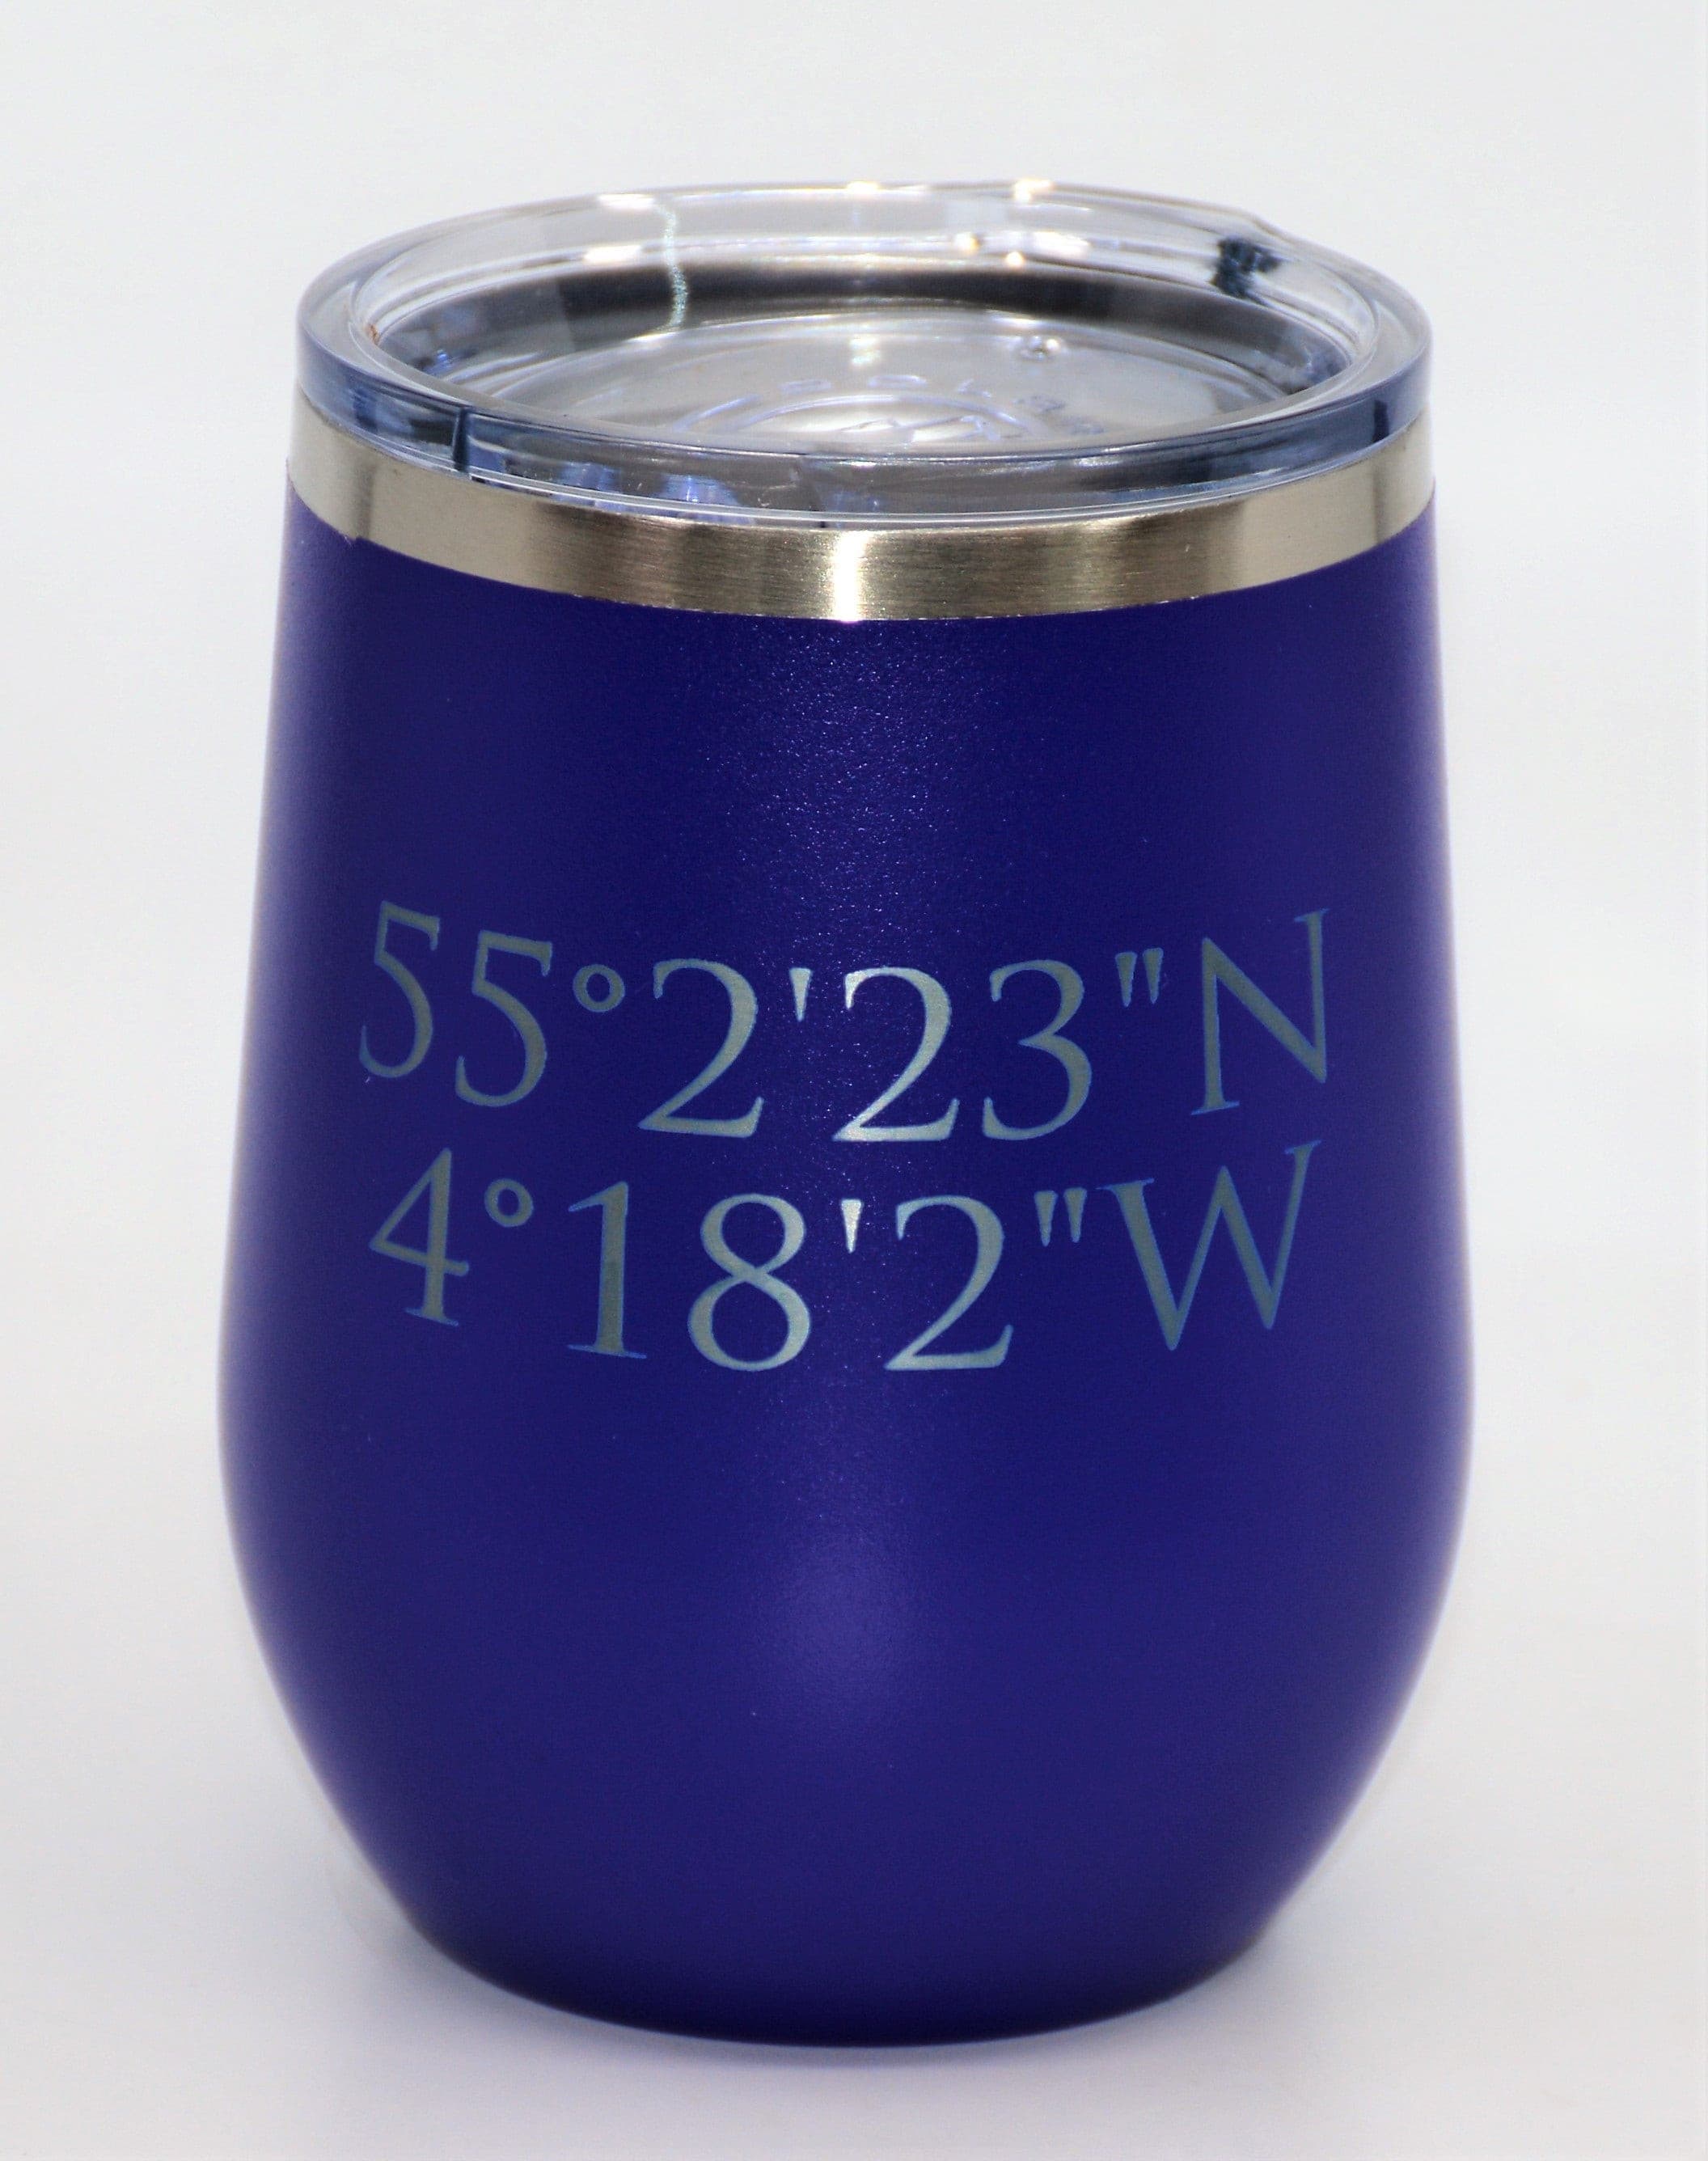 Your Name or Text Any Font Stainless Steel 12OZ Wine Tumbler - Stemless Wine Glass.